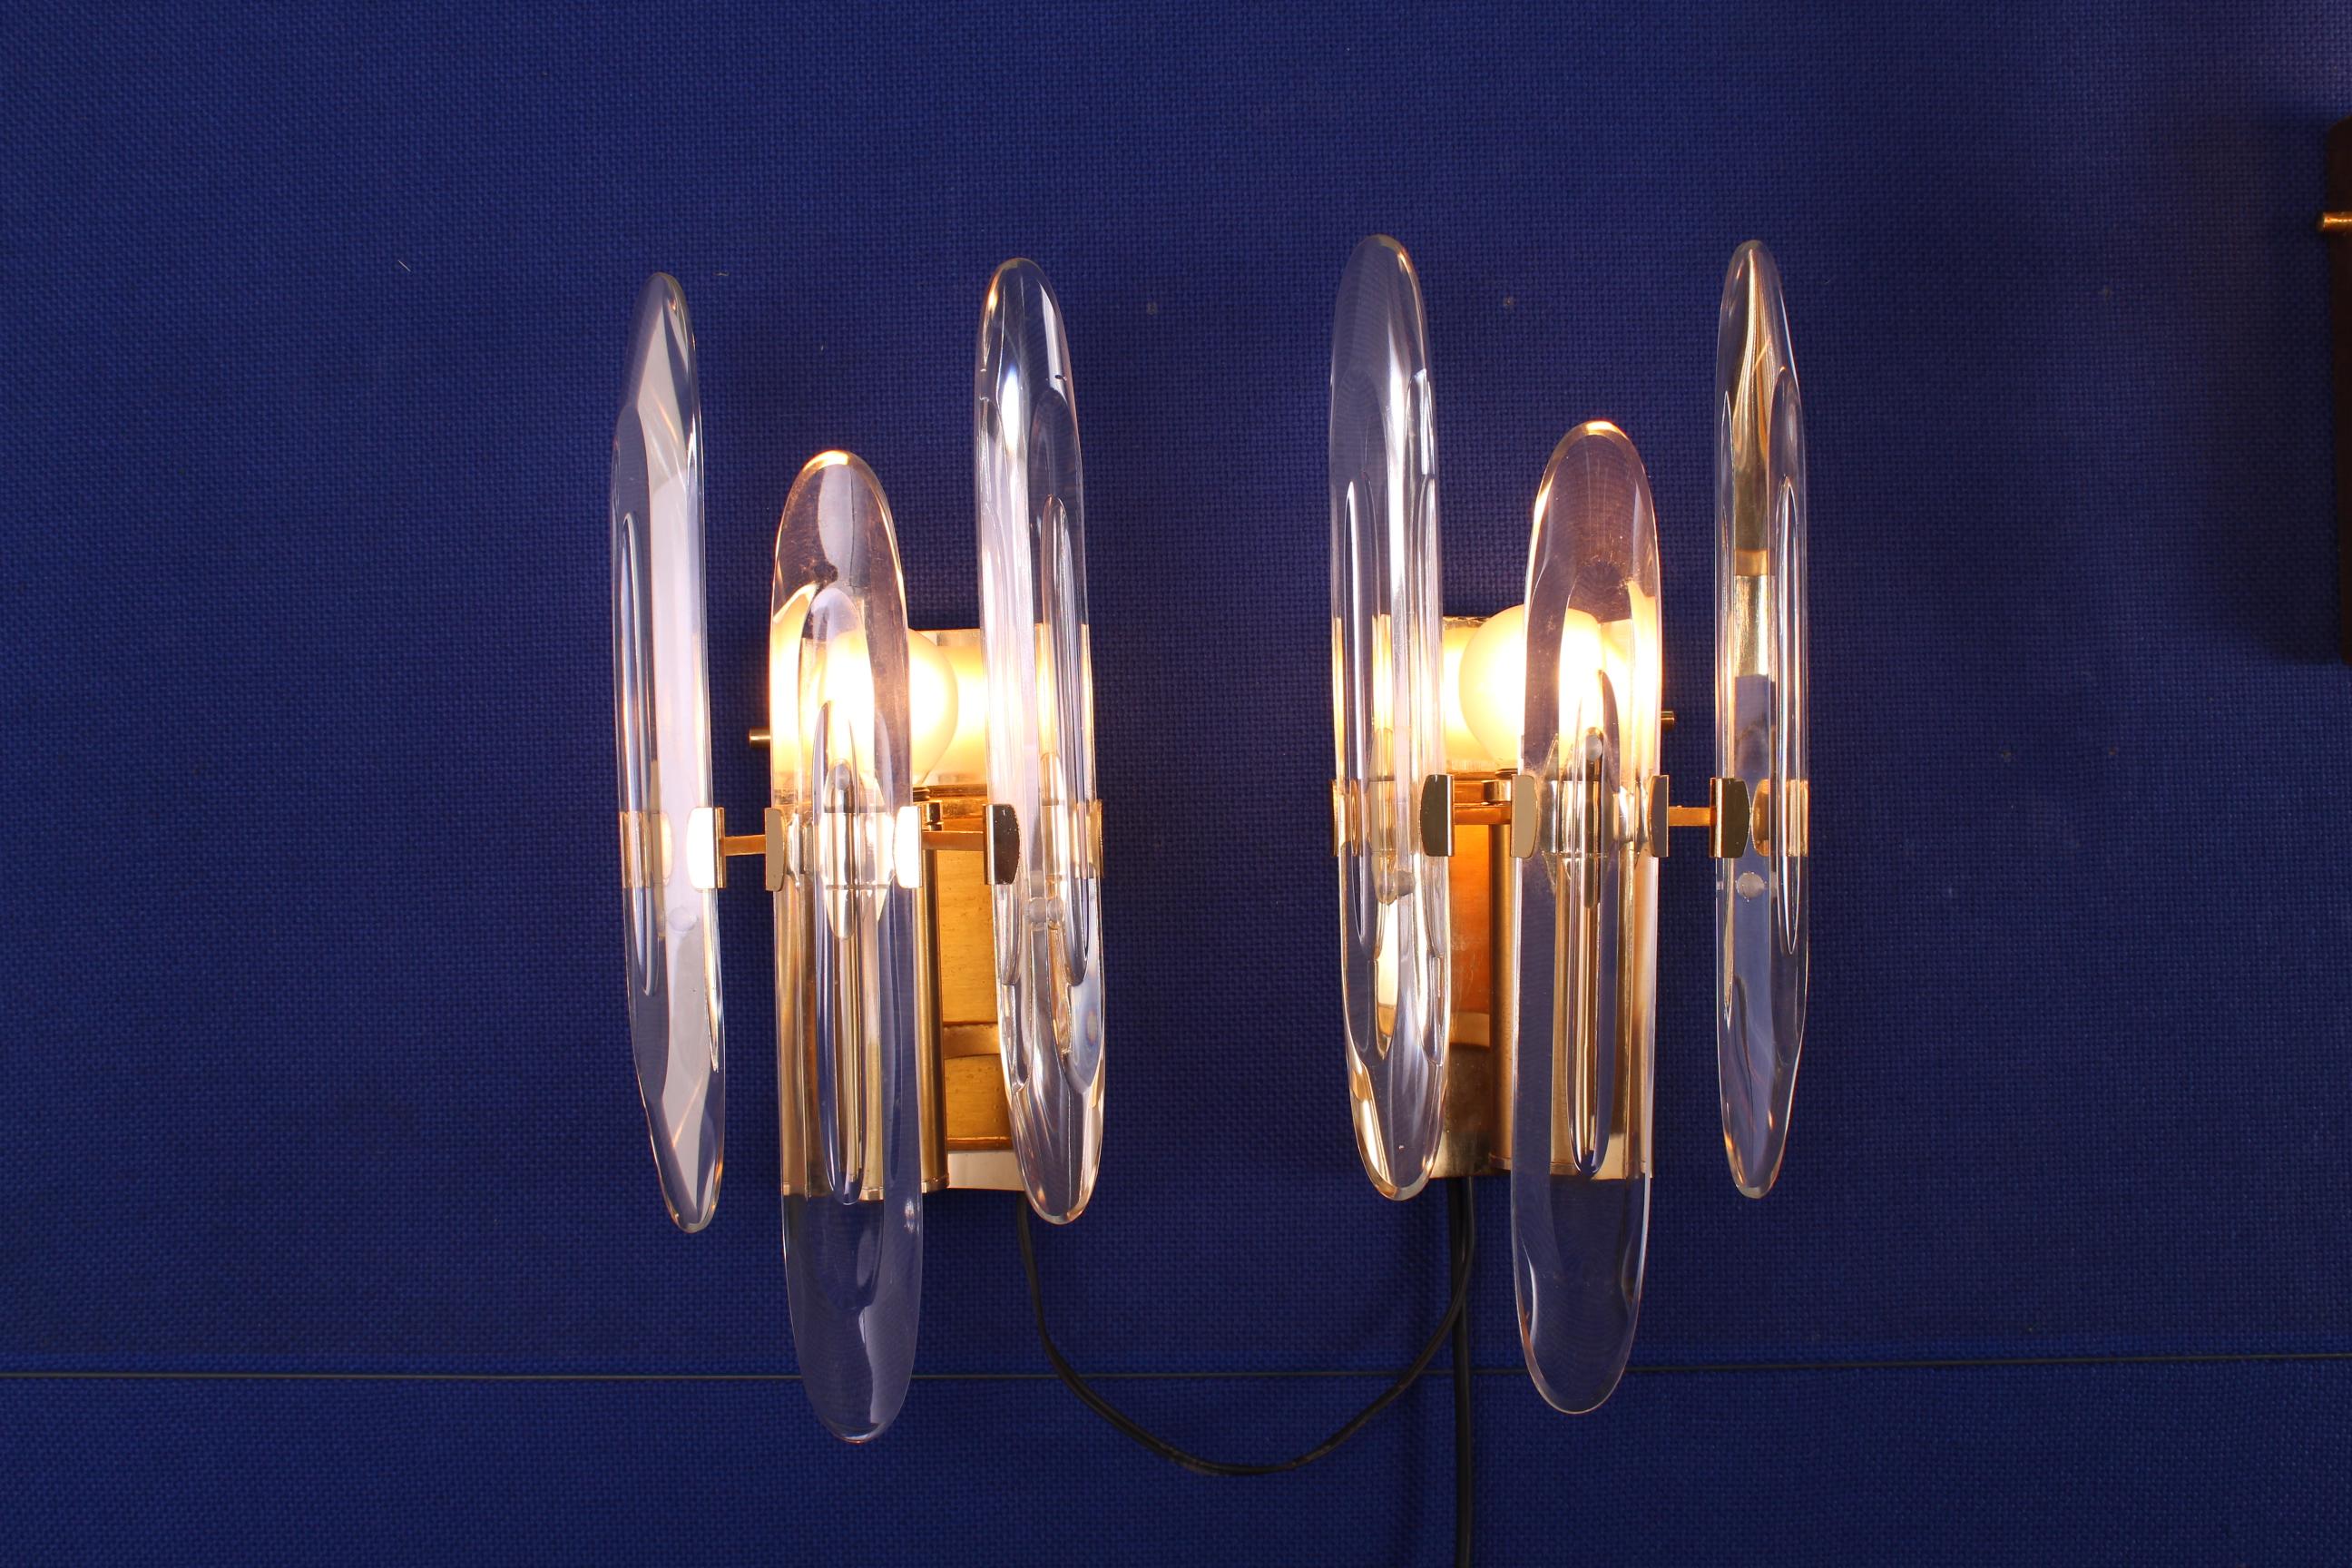 Set of 4 wall sconces designed by Gaetano Sciolari, in brass and glass.Italy  1970,
Wear consistent with age and use.